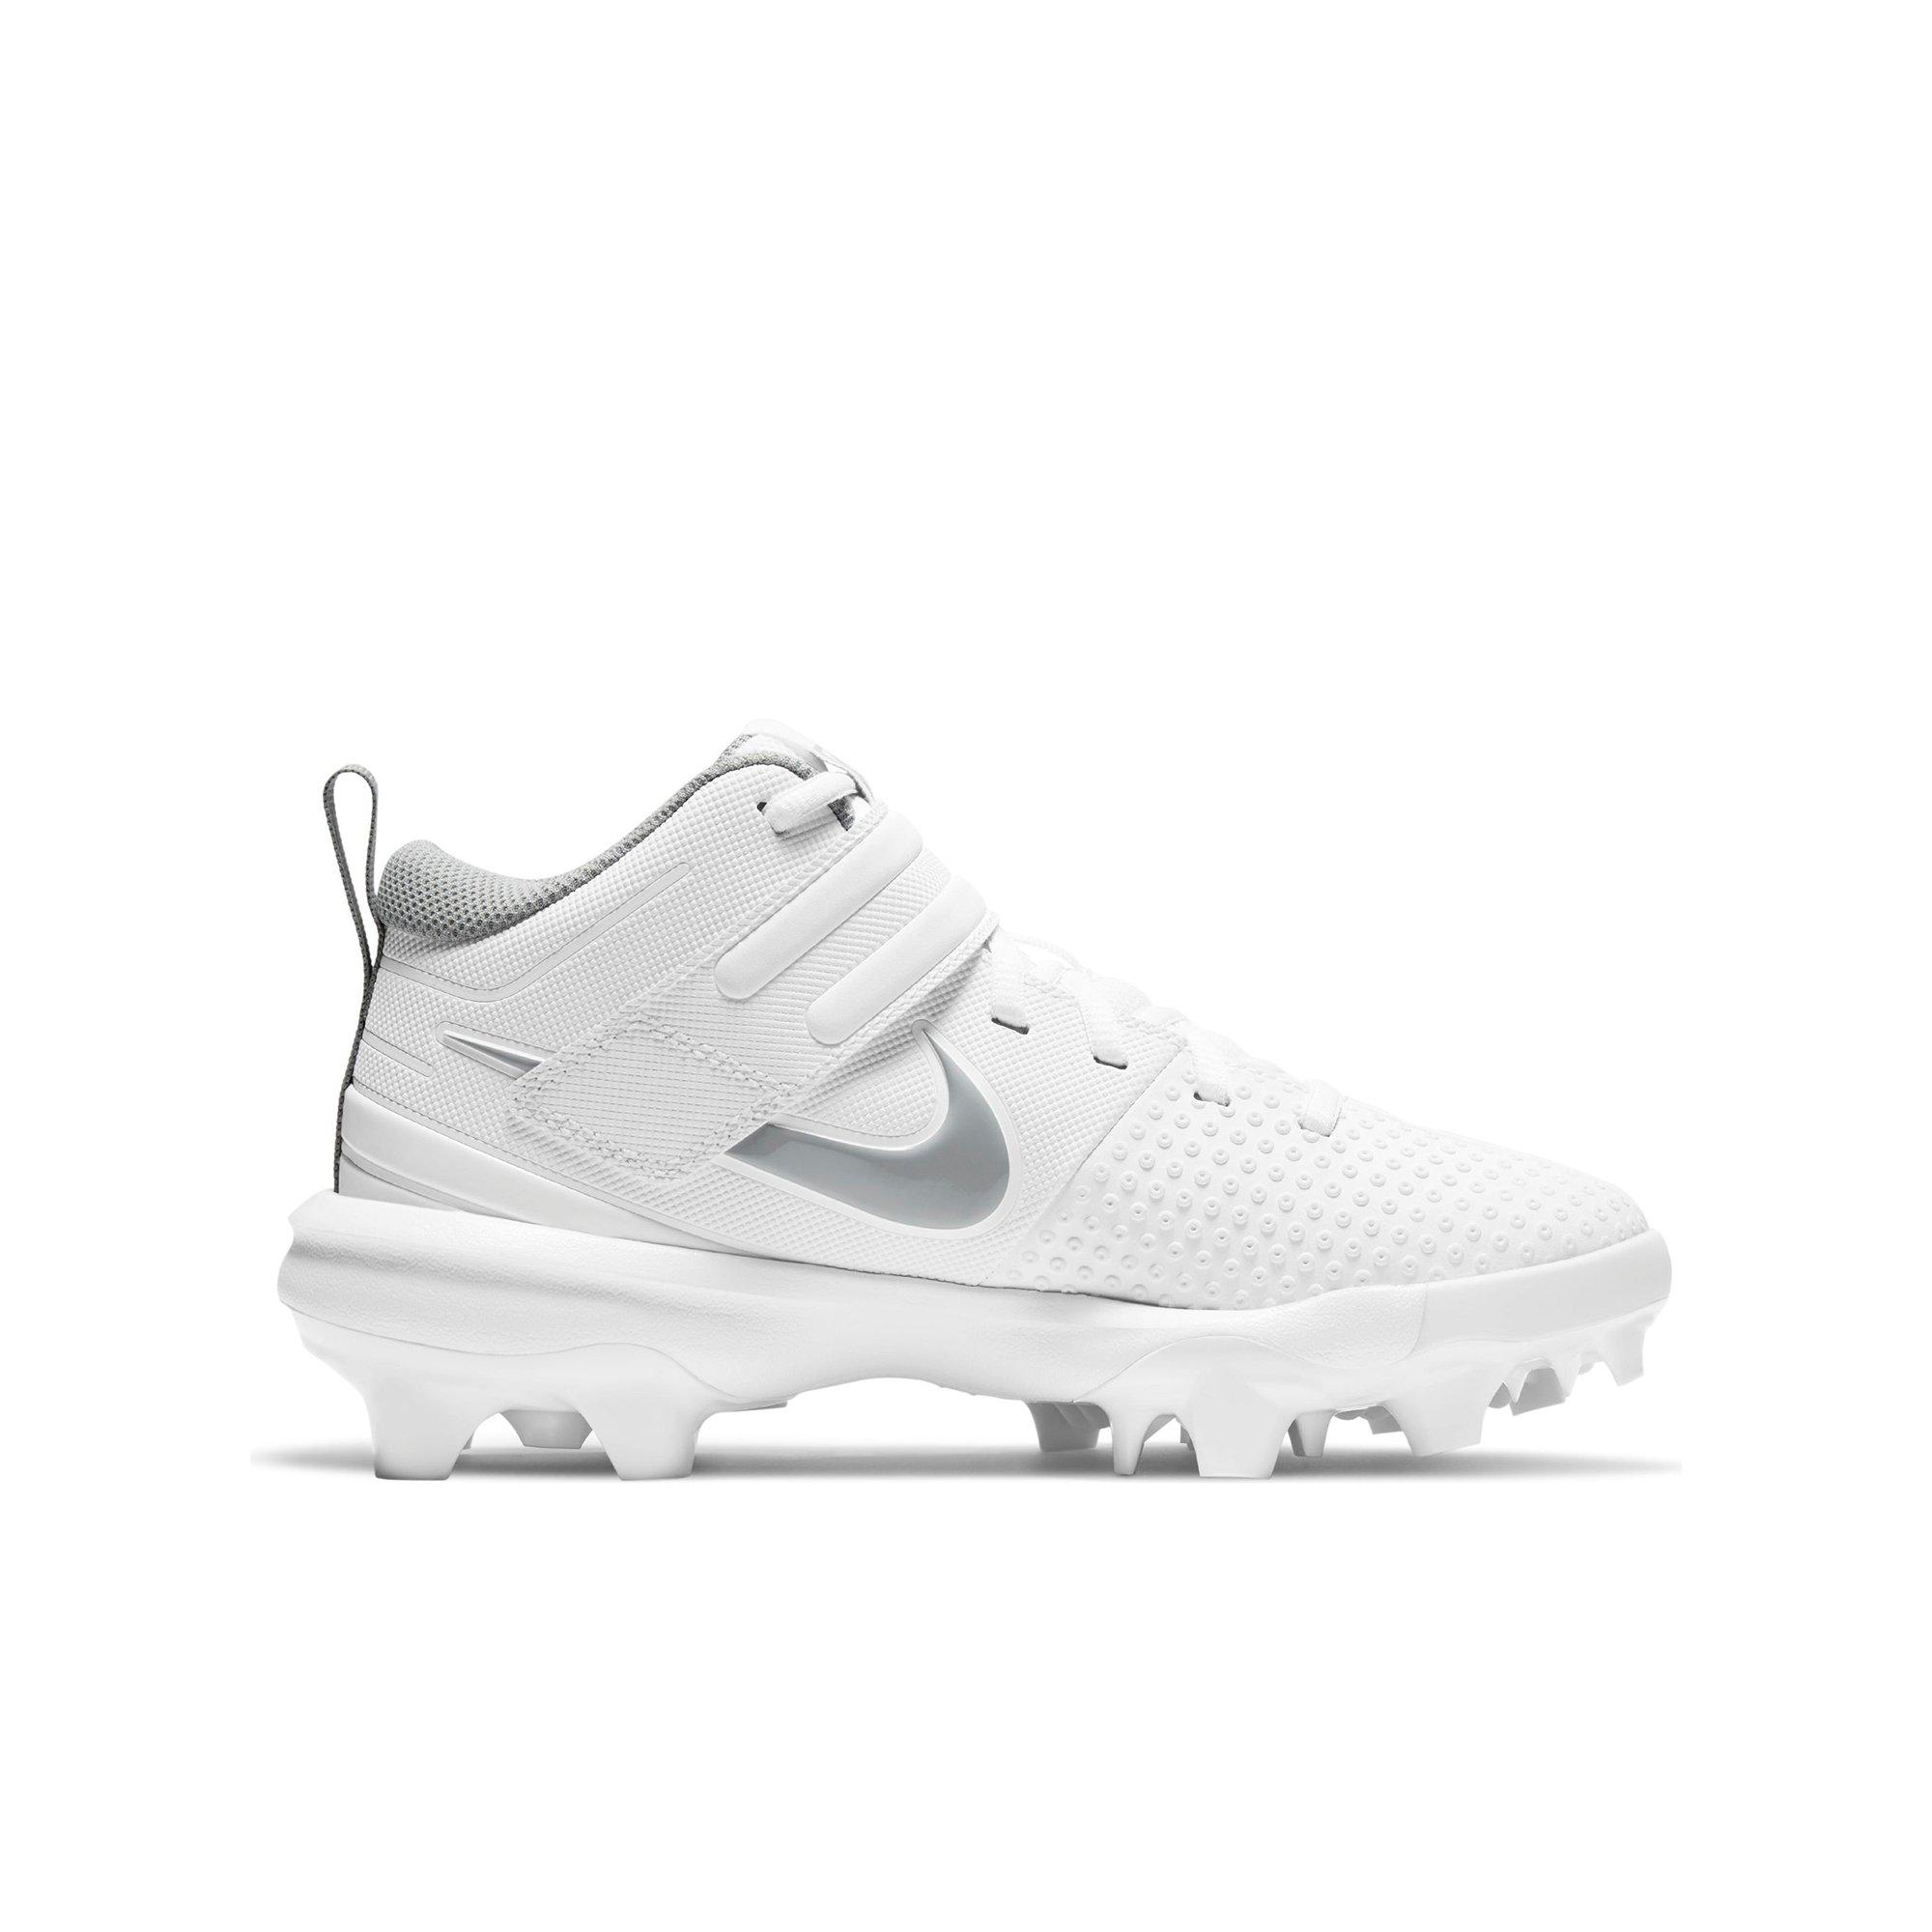 mike trout cleats 7